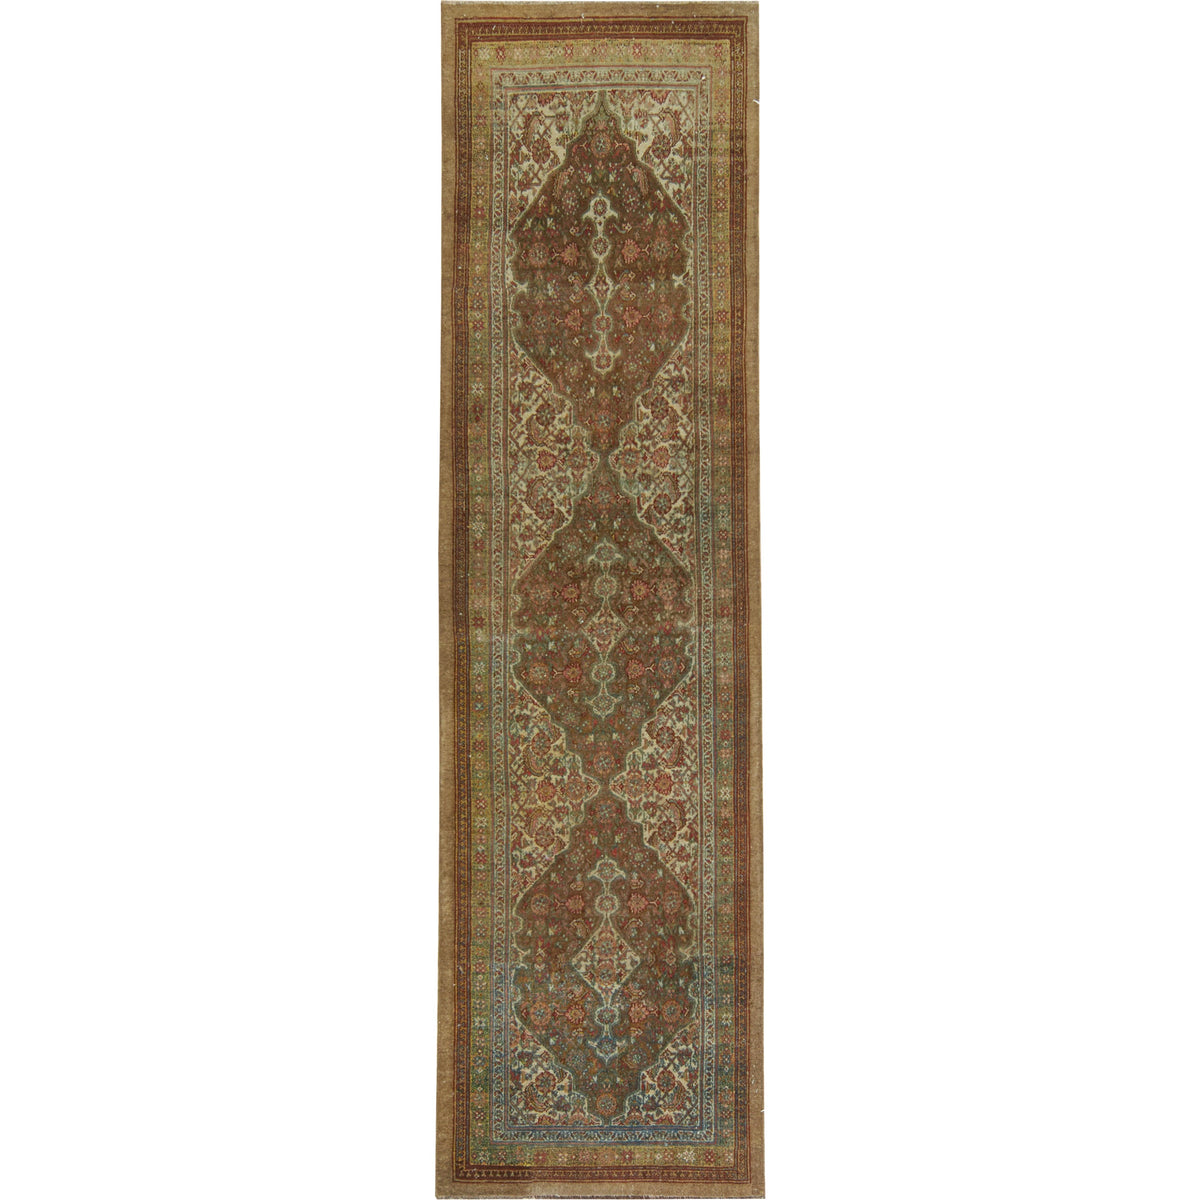 Sailor - The Brown Tapestry of Persian Legacy | Kuden Rugs